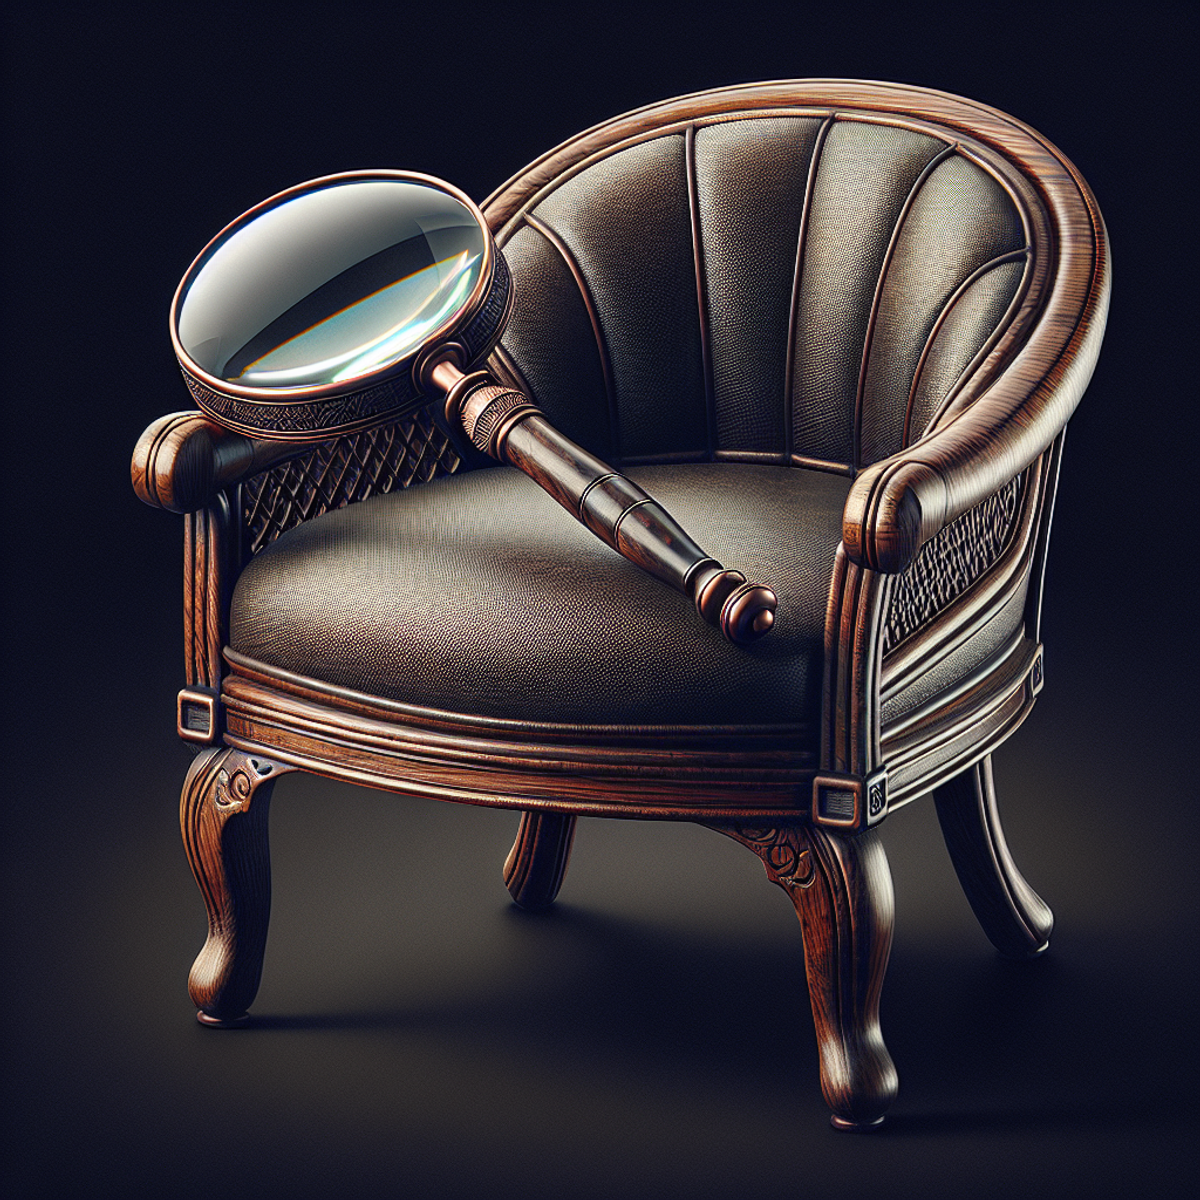 Furniture Appraisers know what to look for when appraising various furniture.